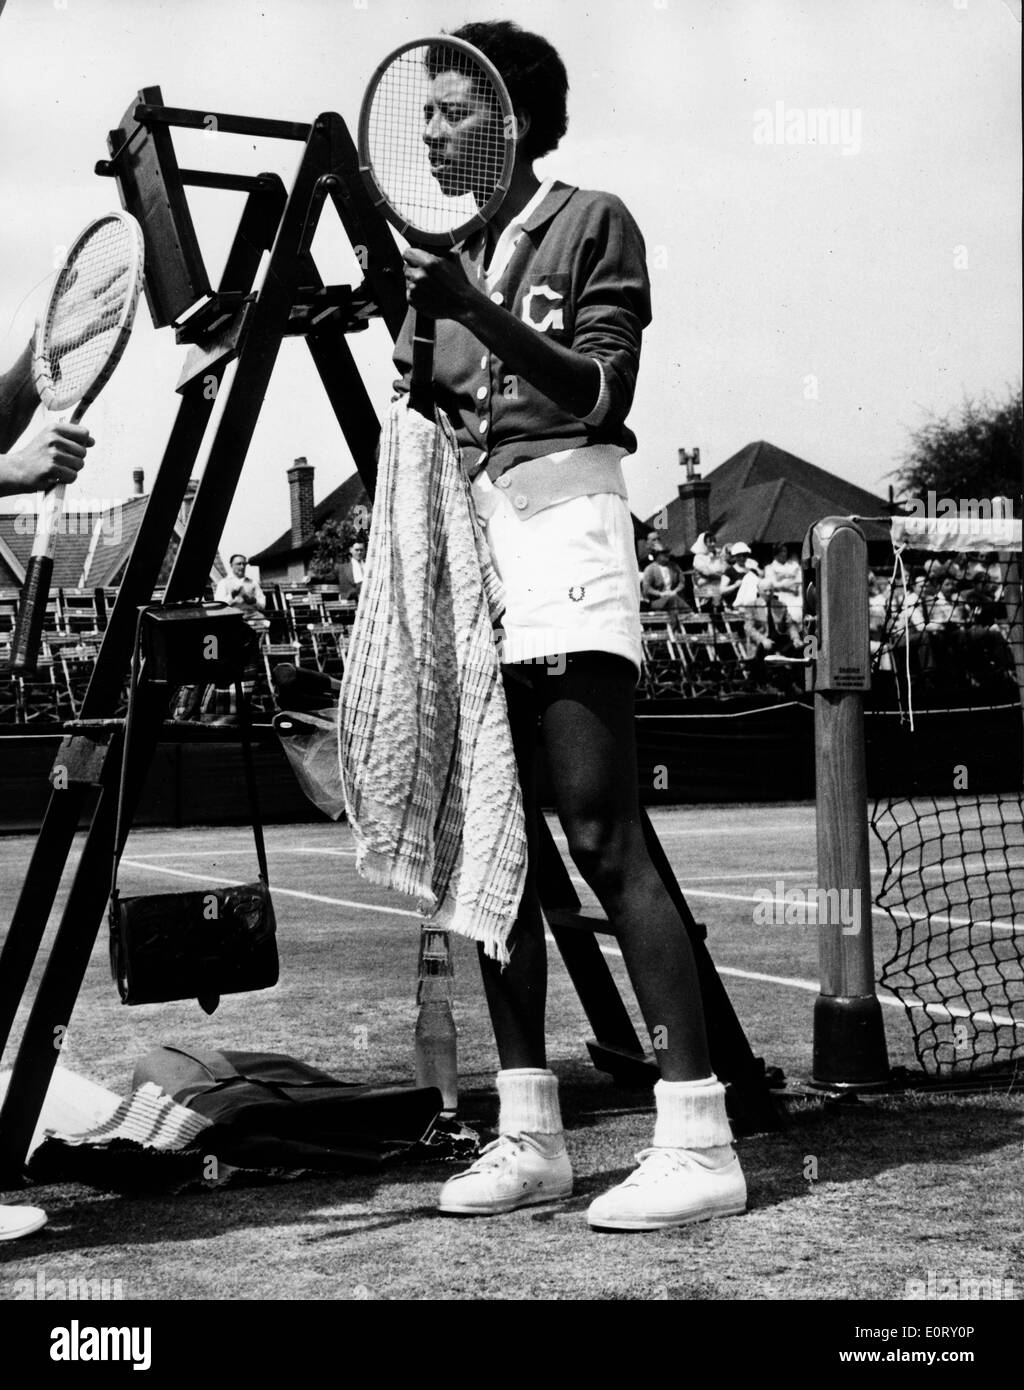 Tennis pro Althea Gibson cleans racket during a match Stock Photo